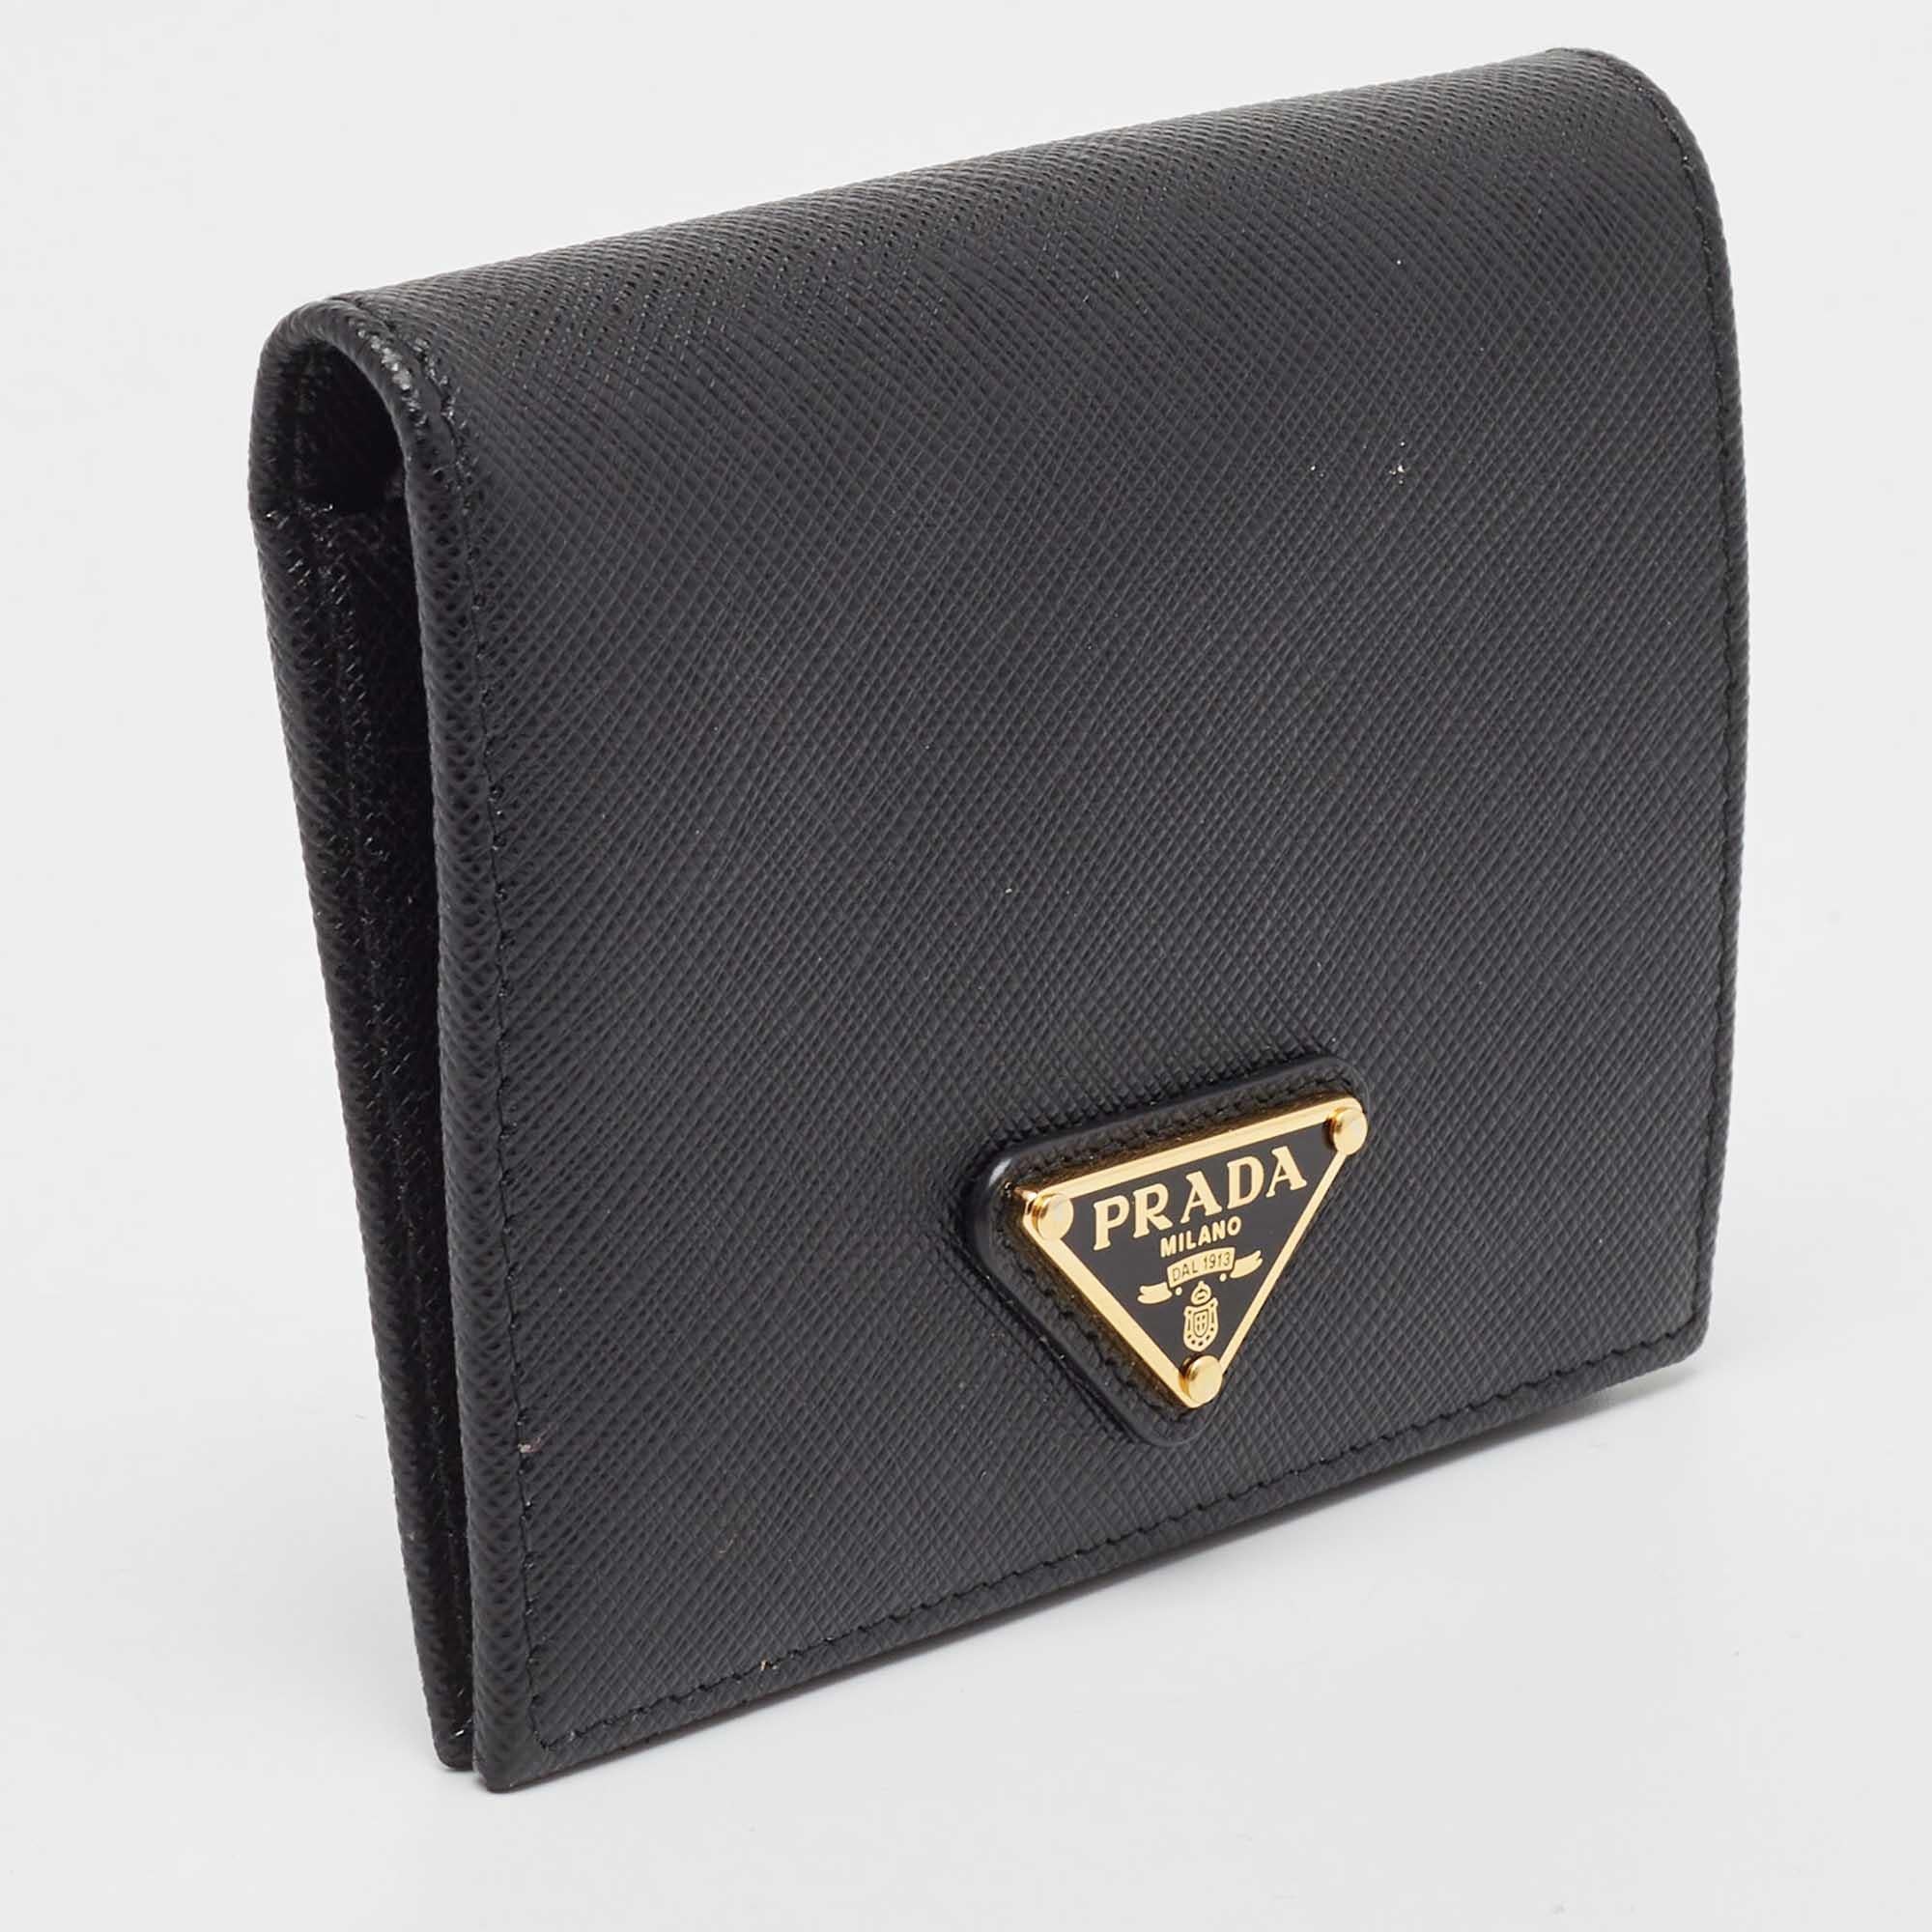 This Prada bifold wallet is the most classy way to organize your essentials. The black leather creation is detailed with the brand logo at the front and features an interior equipped with a flap coin pocket, multiple card slots, and slip